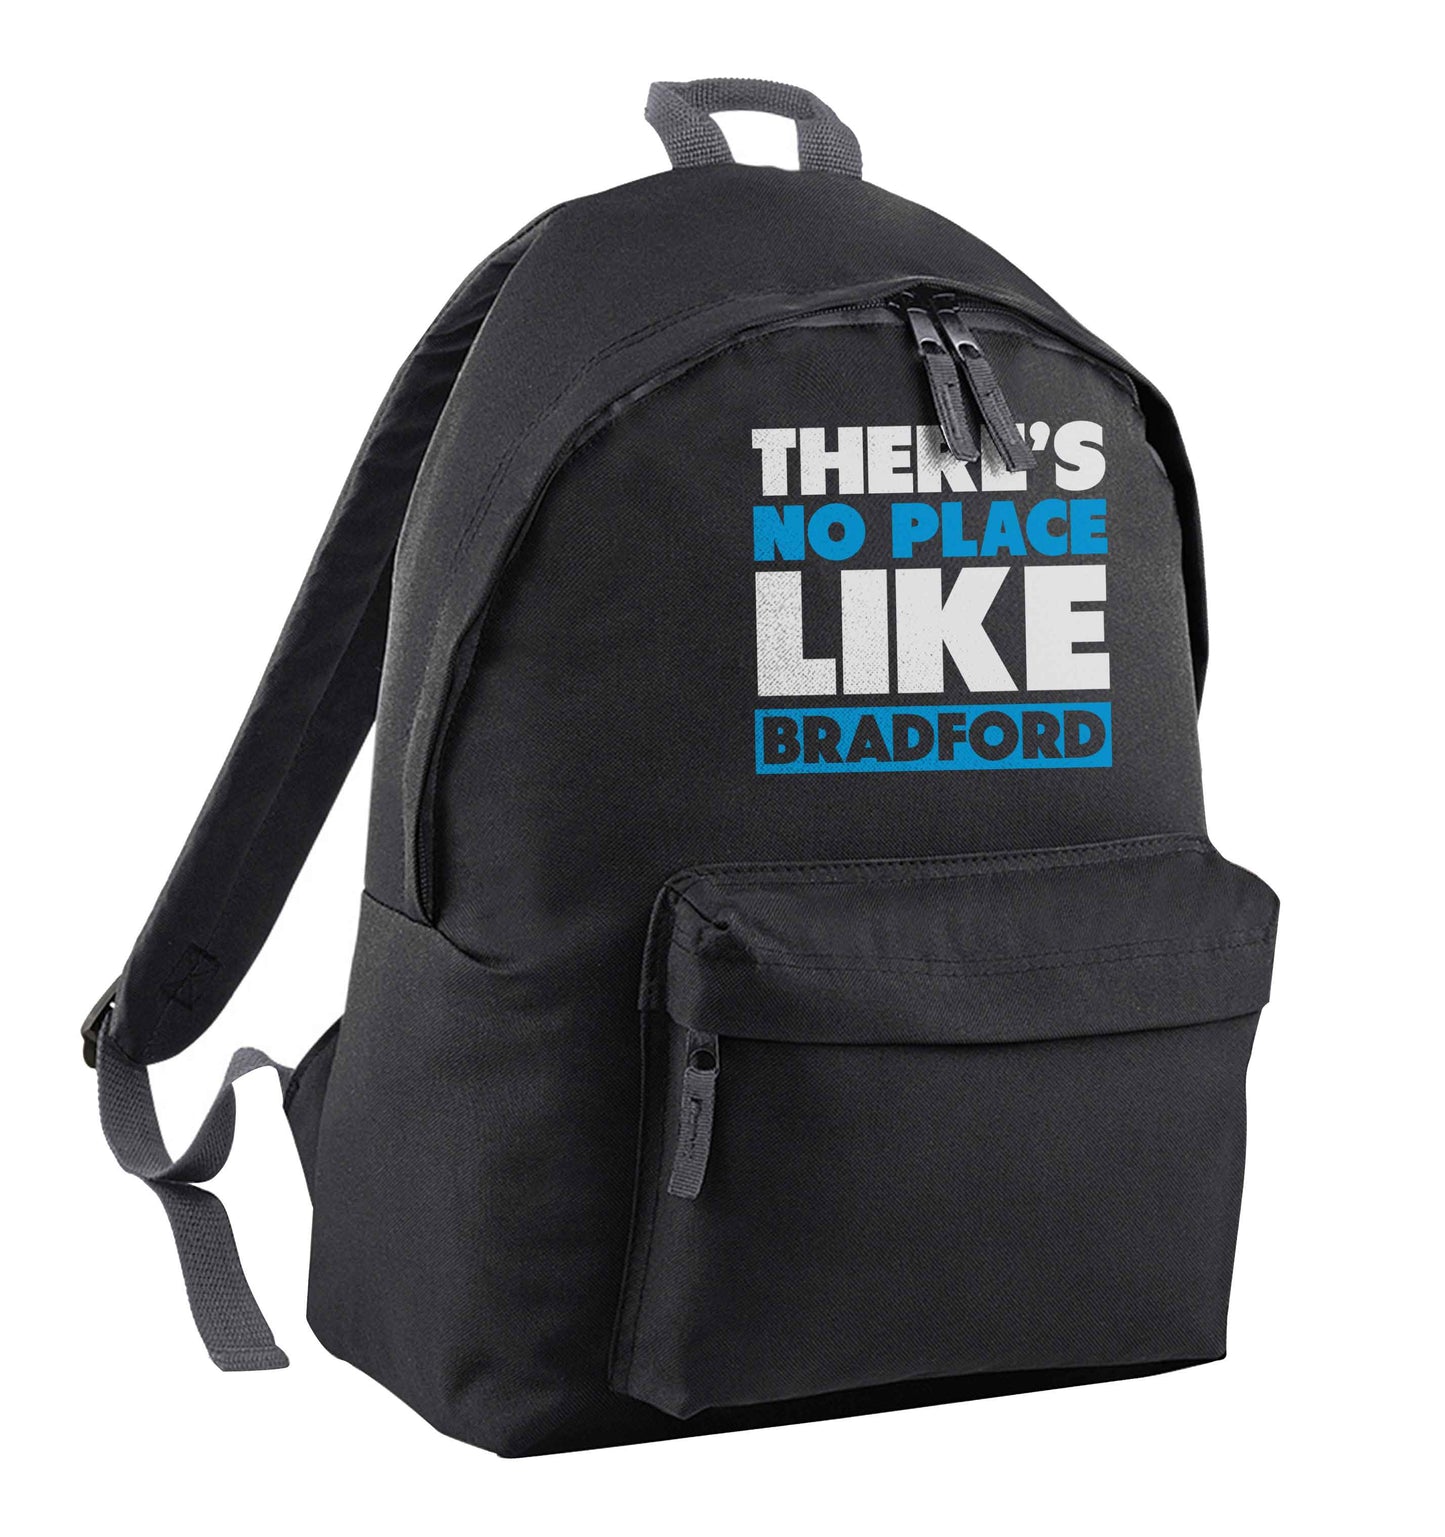 There's no place like Bradford black children's backpack